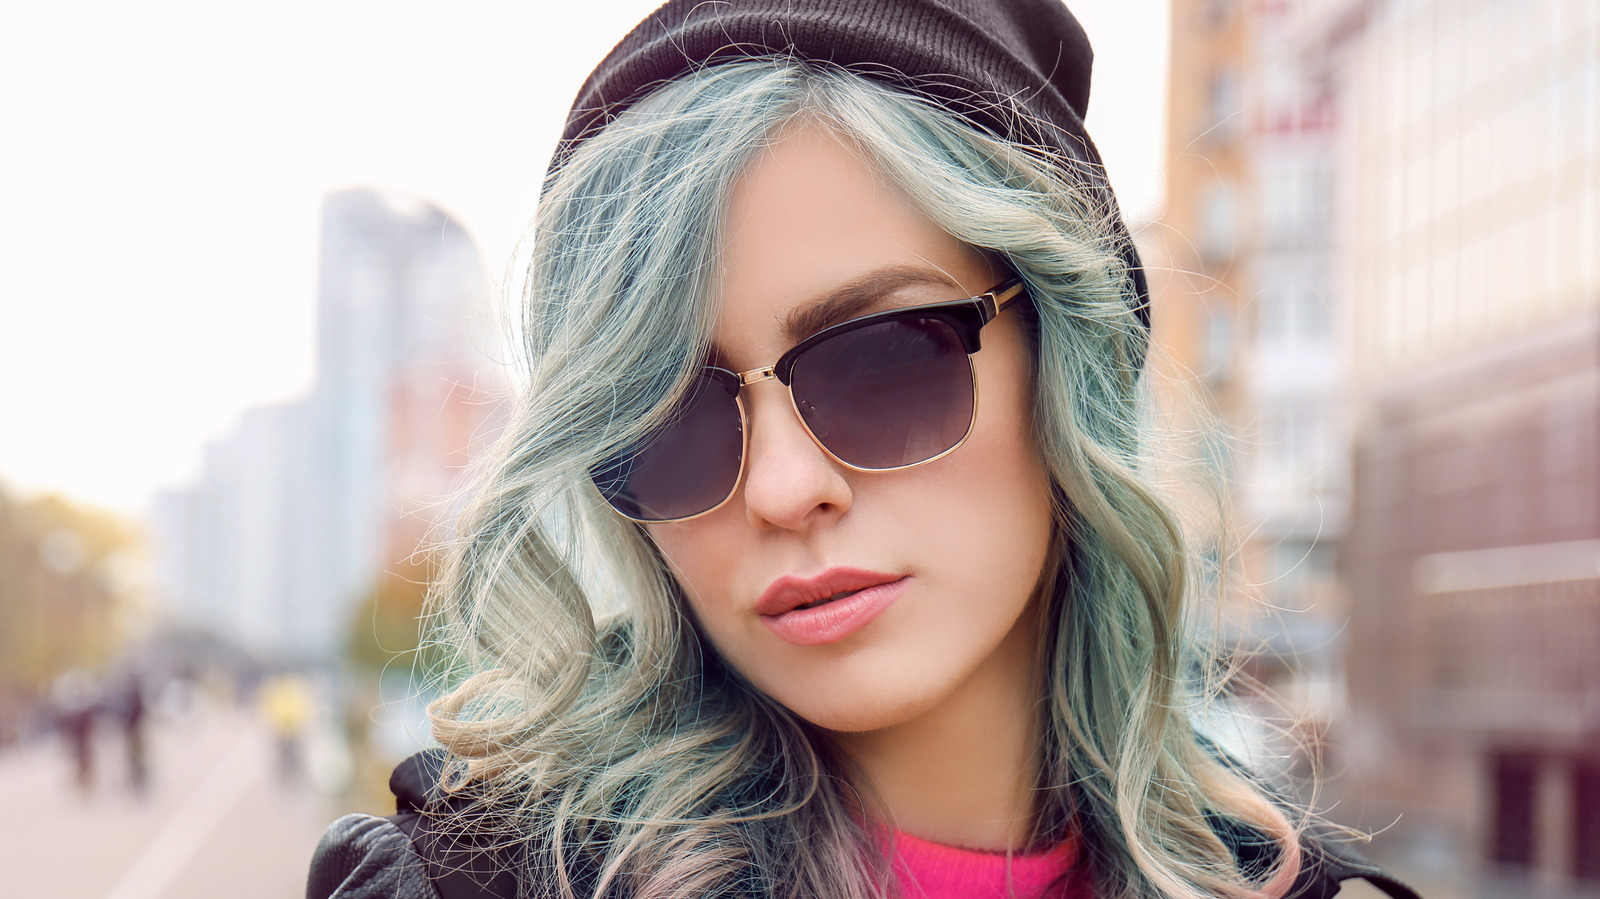 4. "Glacier Blue Hair Color: What You Need to Know Before Dyeing Your Hair" - wide 7